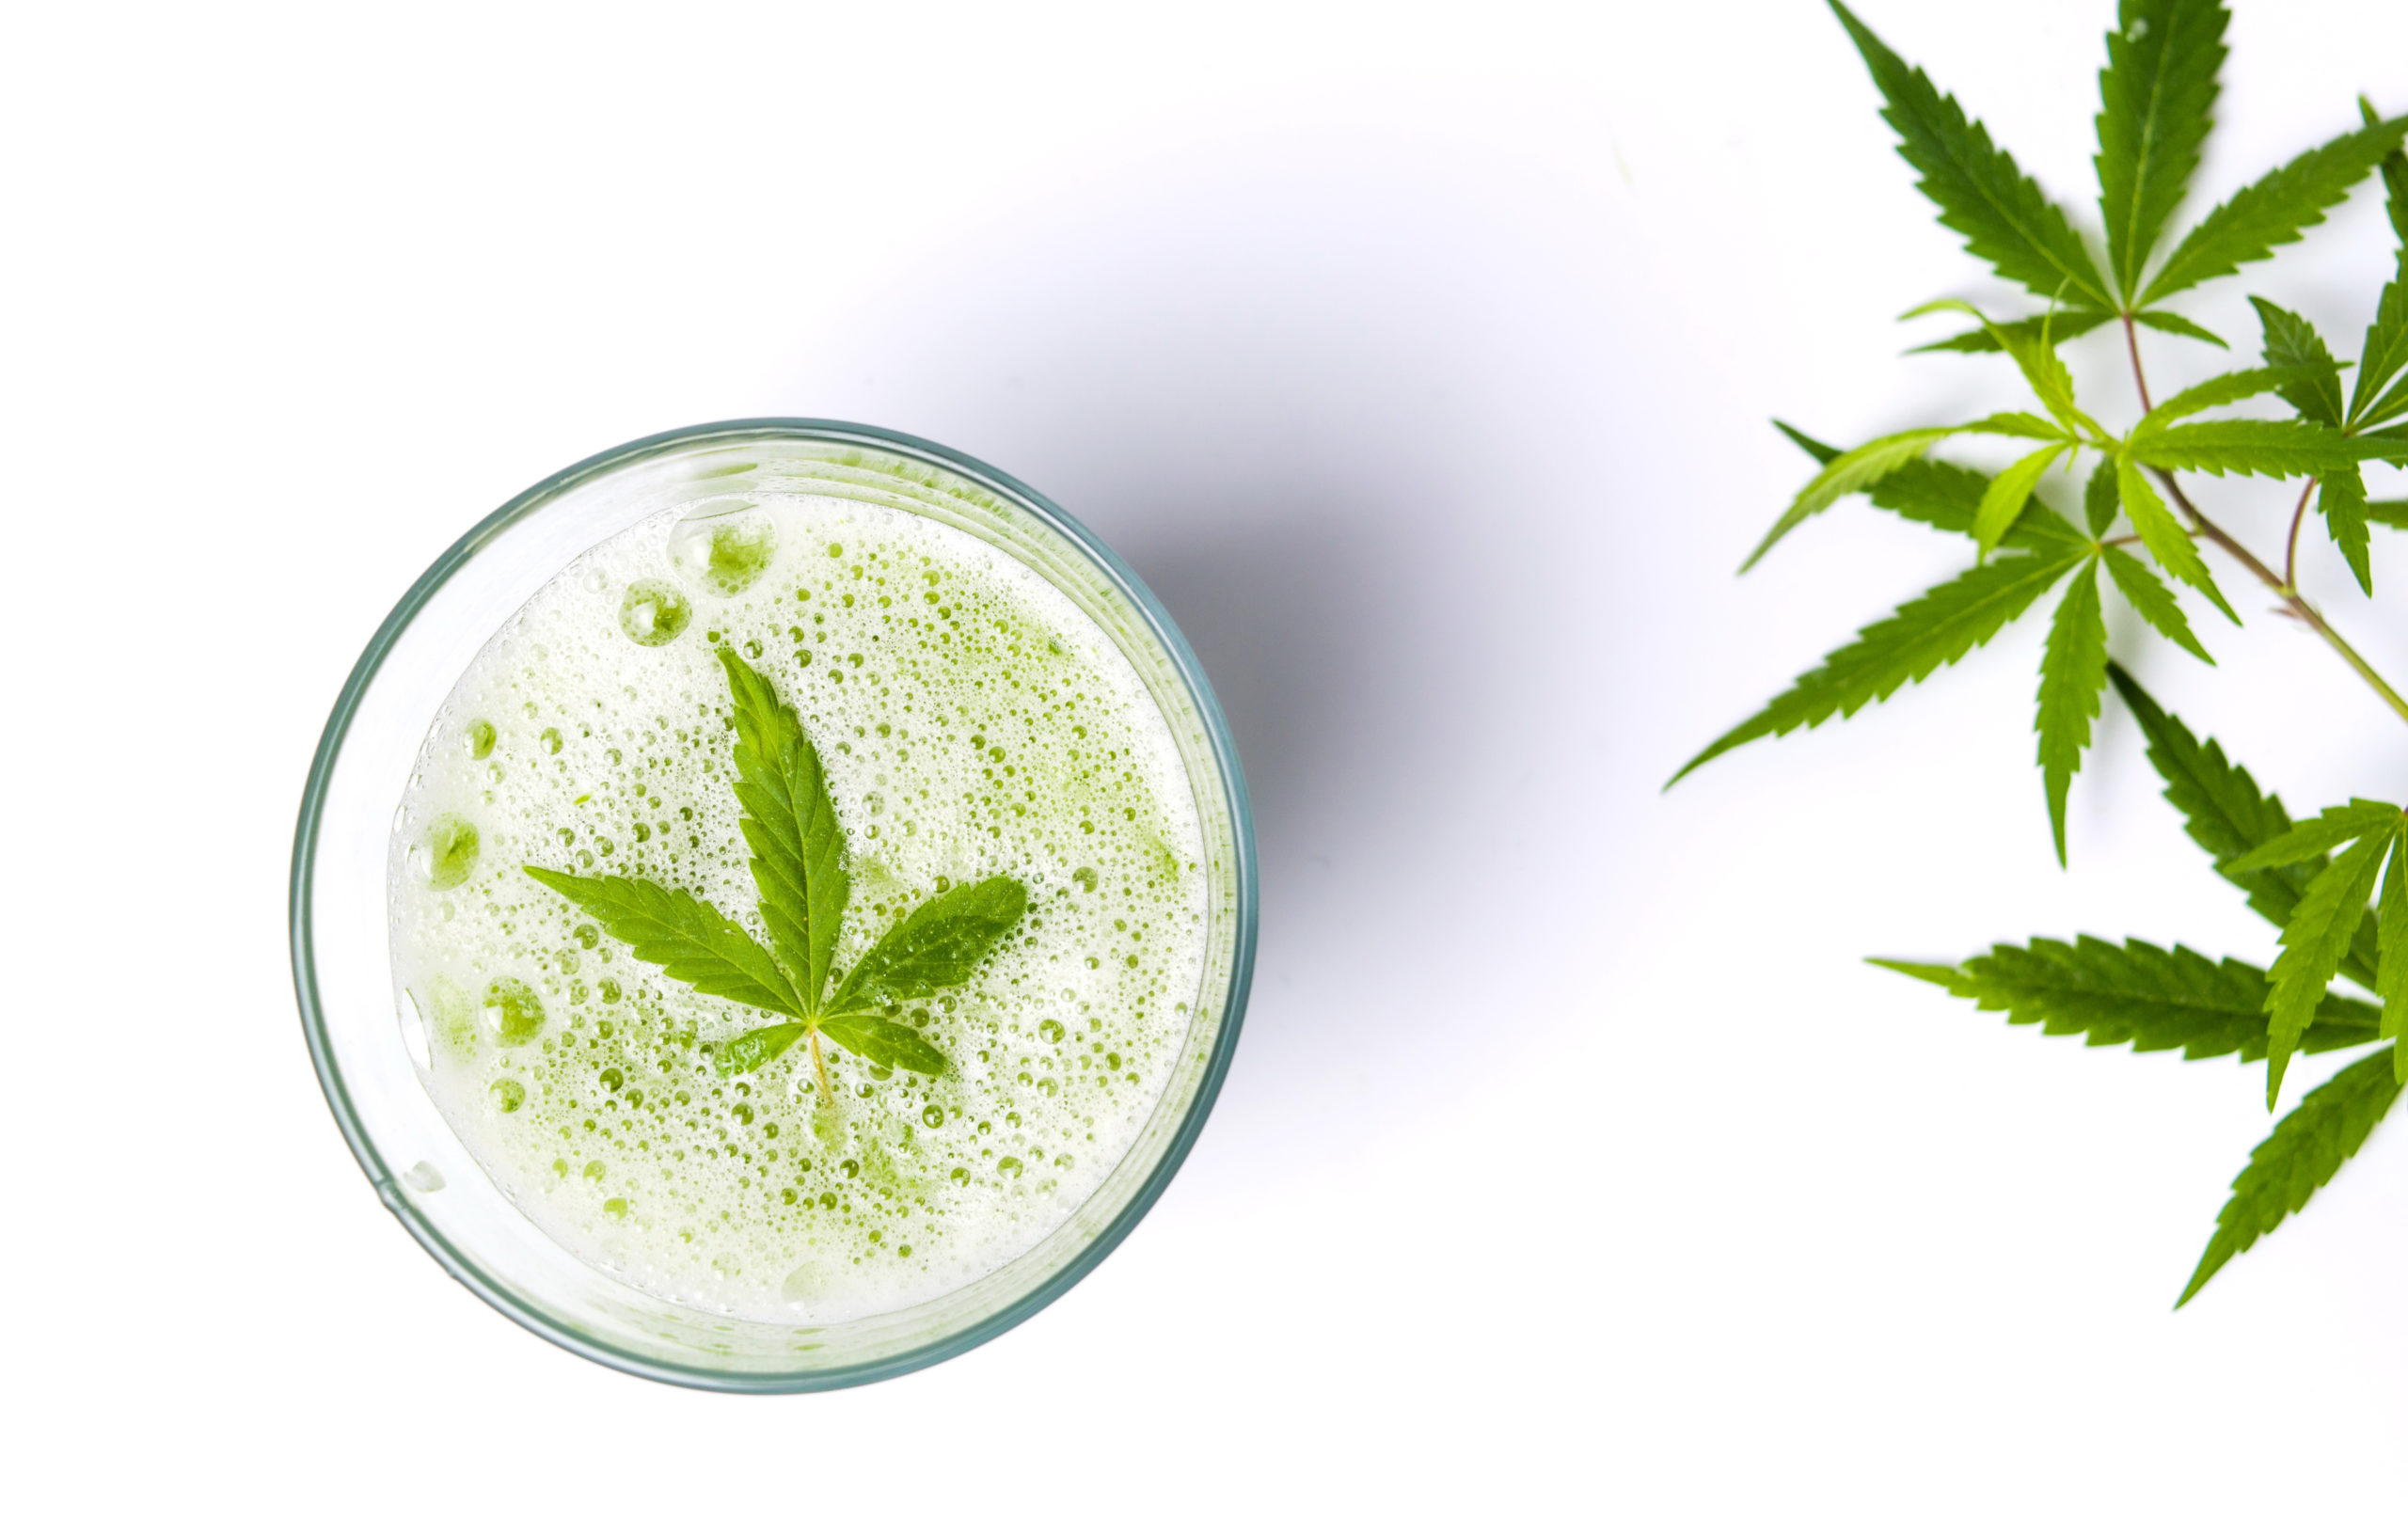 A Look at the Future of Cannabis Beverages